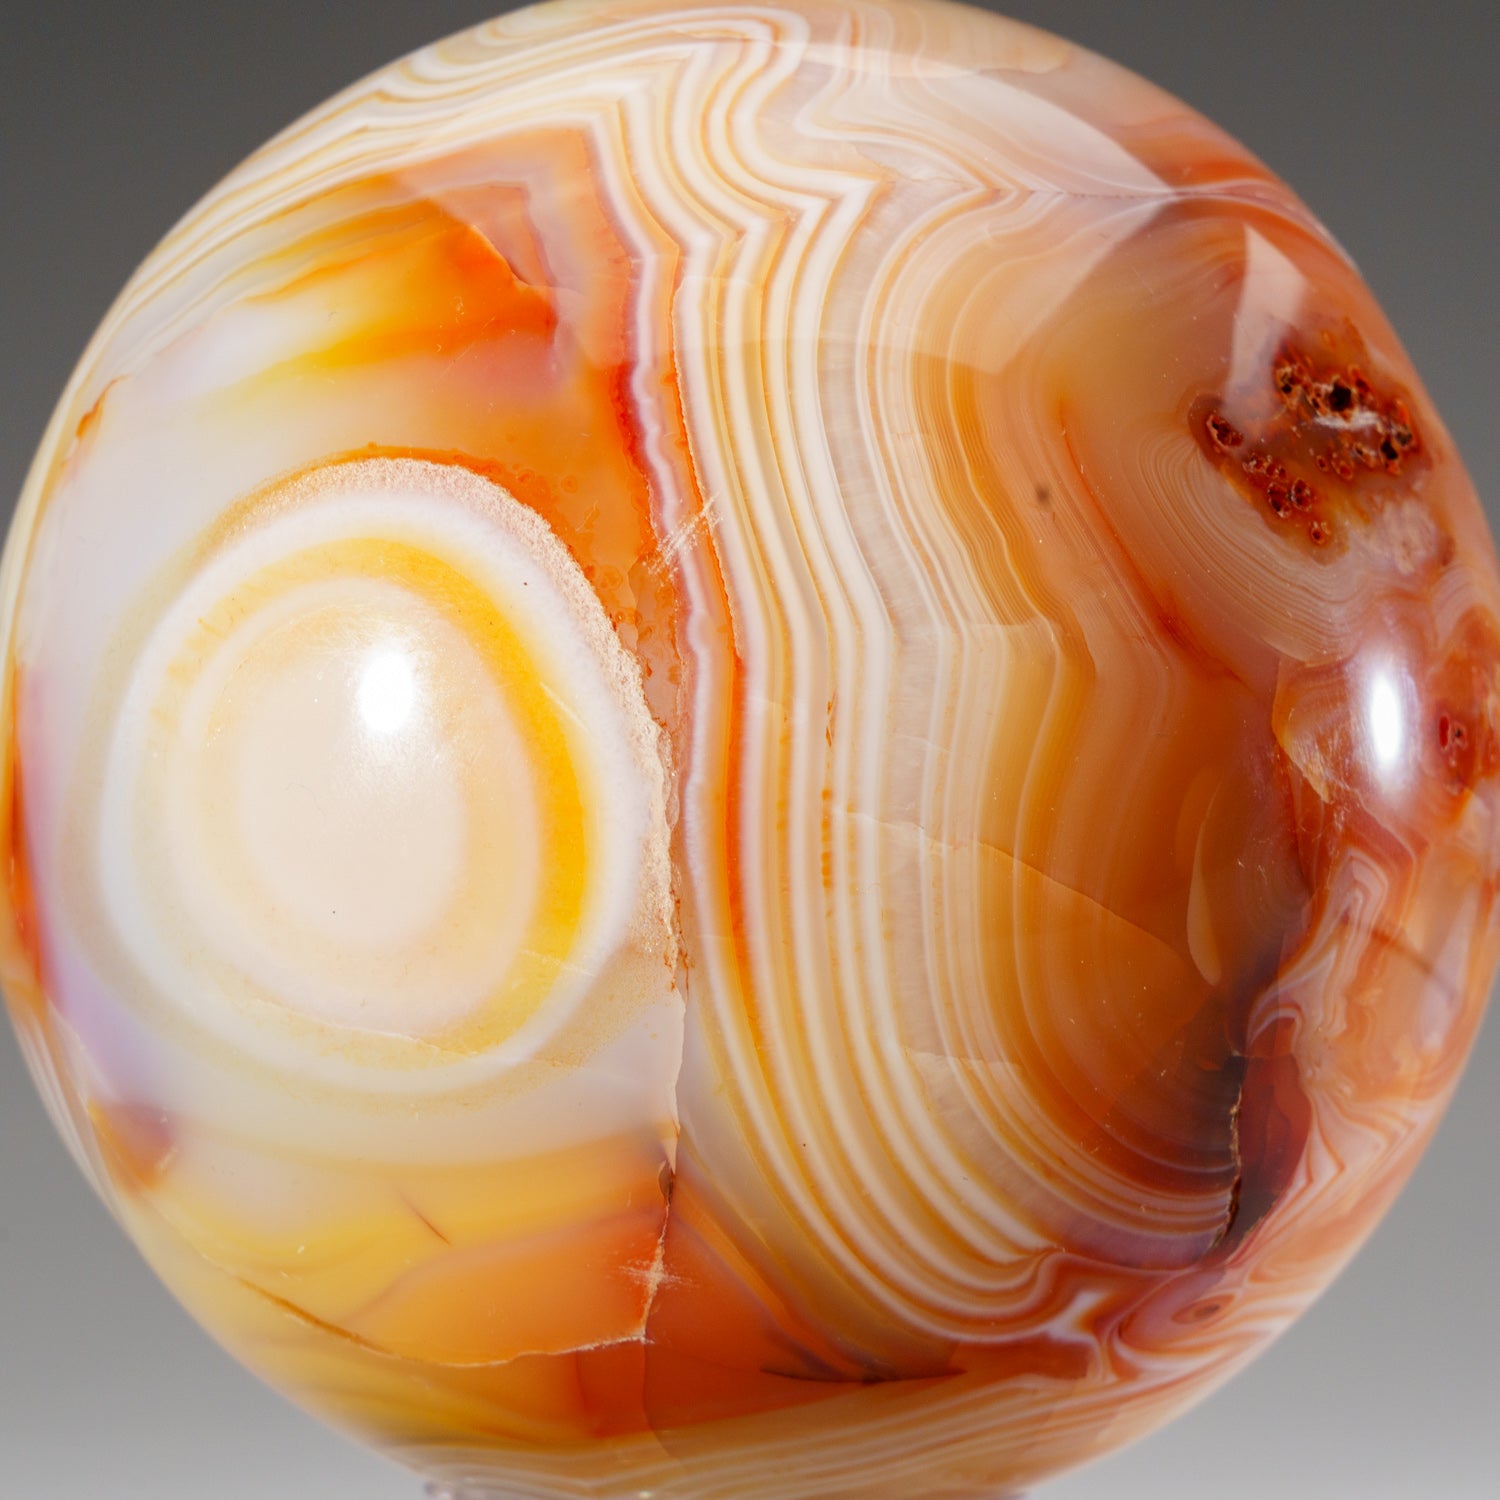 Polished Carnelian Agate Sphere from Madagascar (3.5 lbs)